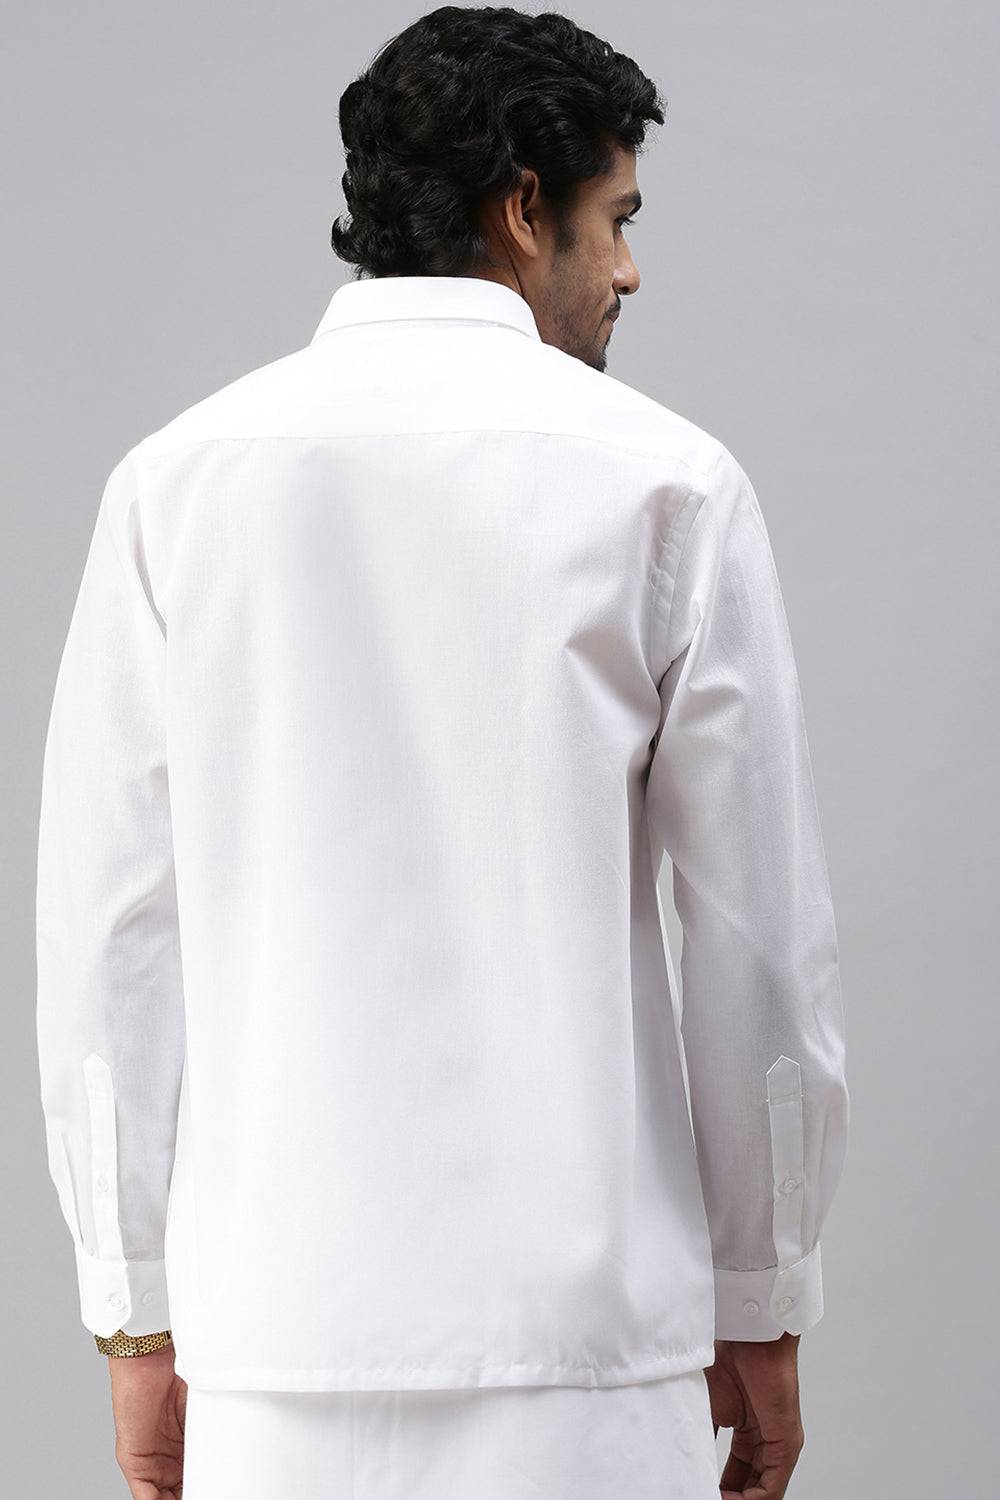 Mens Poly Cotton Full Sleeves White Shirt Expert- Back view